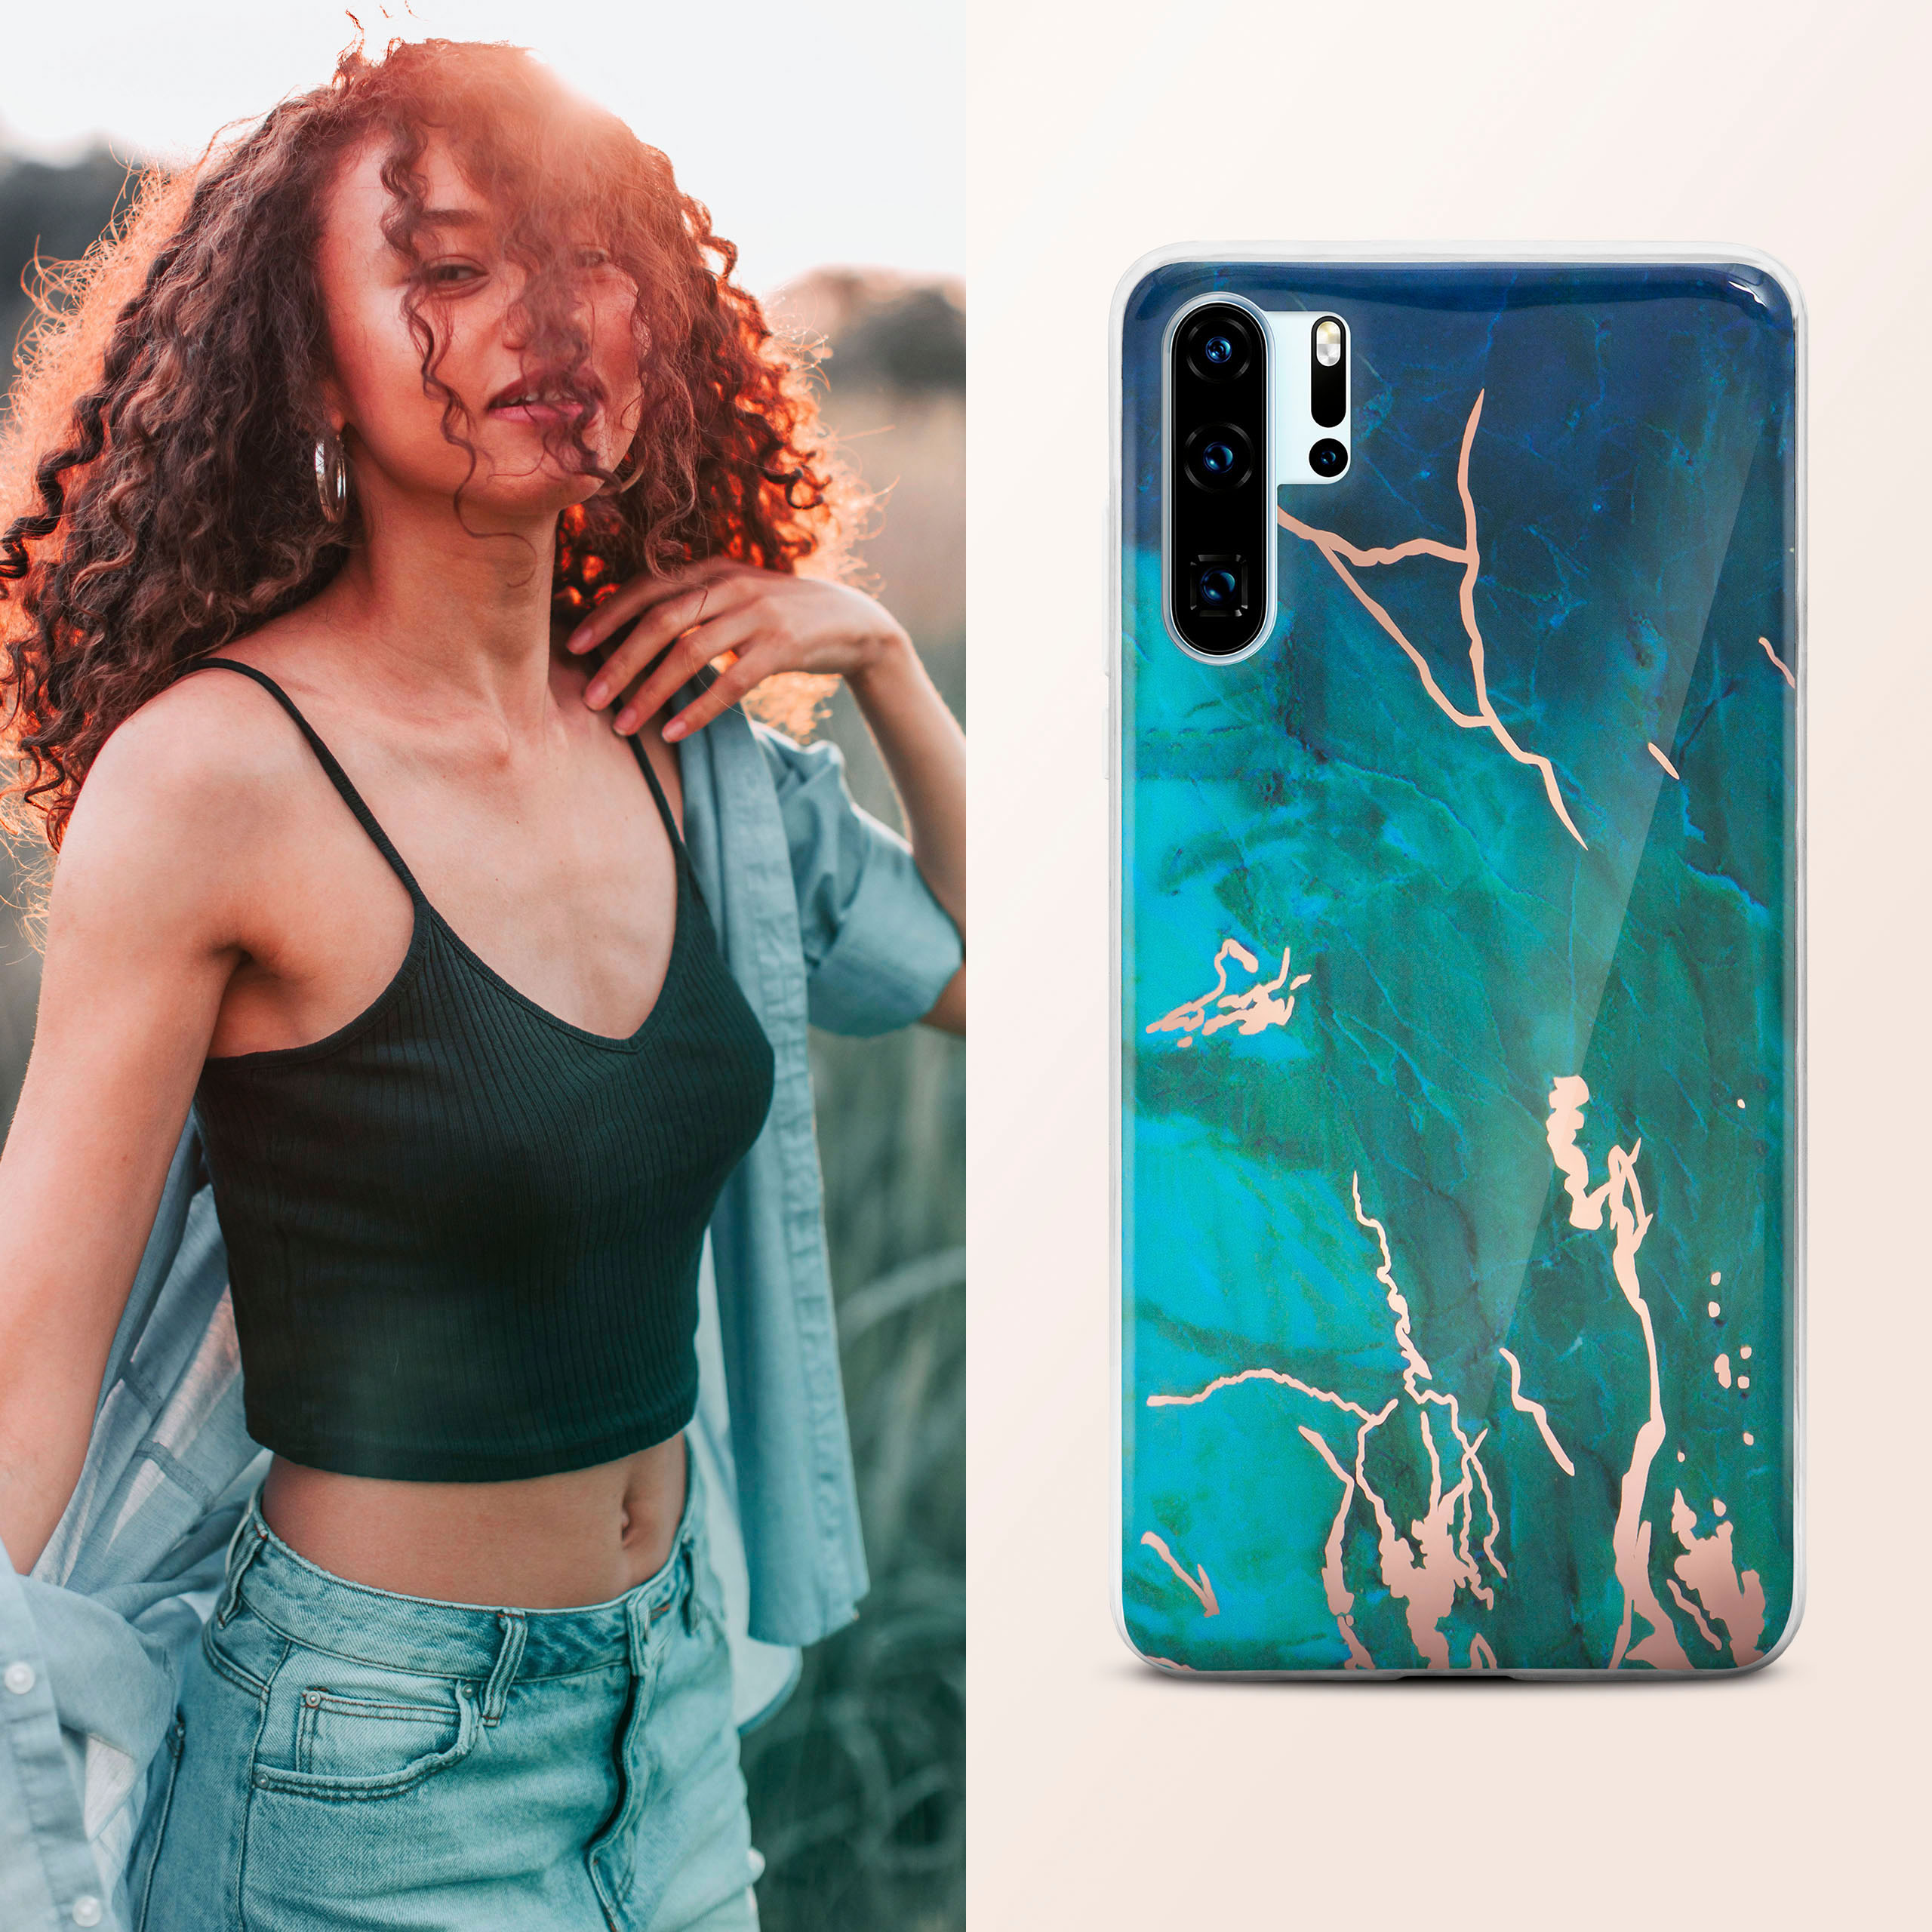 New Backcover, P30 ONEFLOW Case, Huawei, Pro/P30 Ed, Excitement Sense Pro